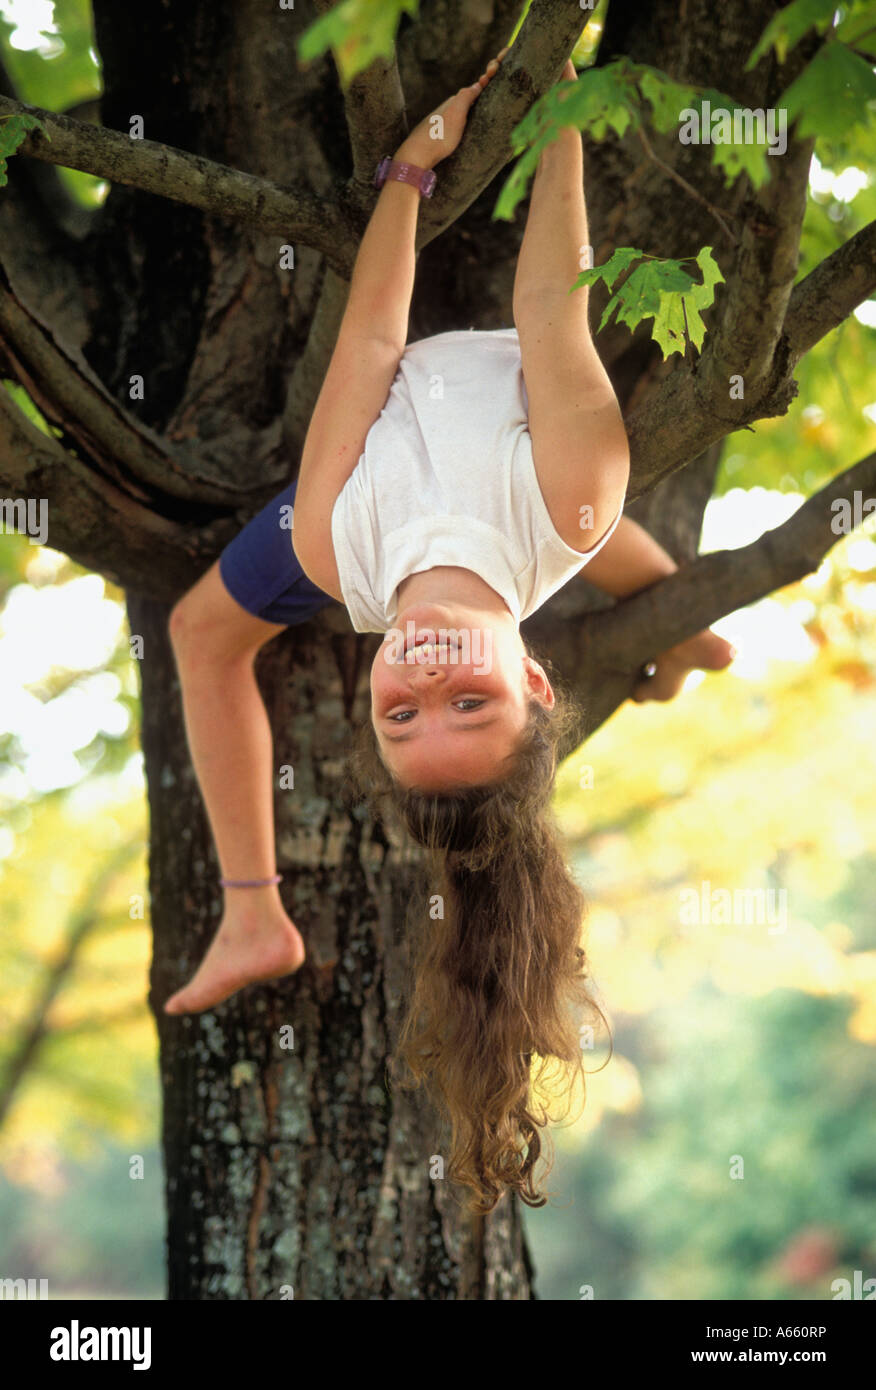 Young Girl Hanging Upside Down from Tree Limb and Smiling at Camera Stock Photo